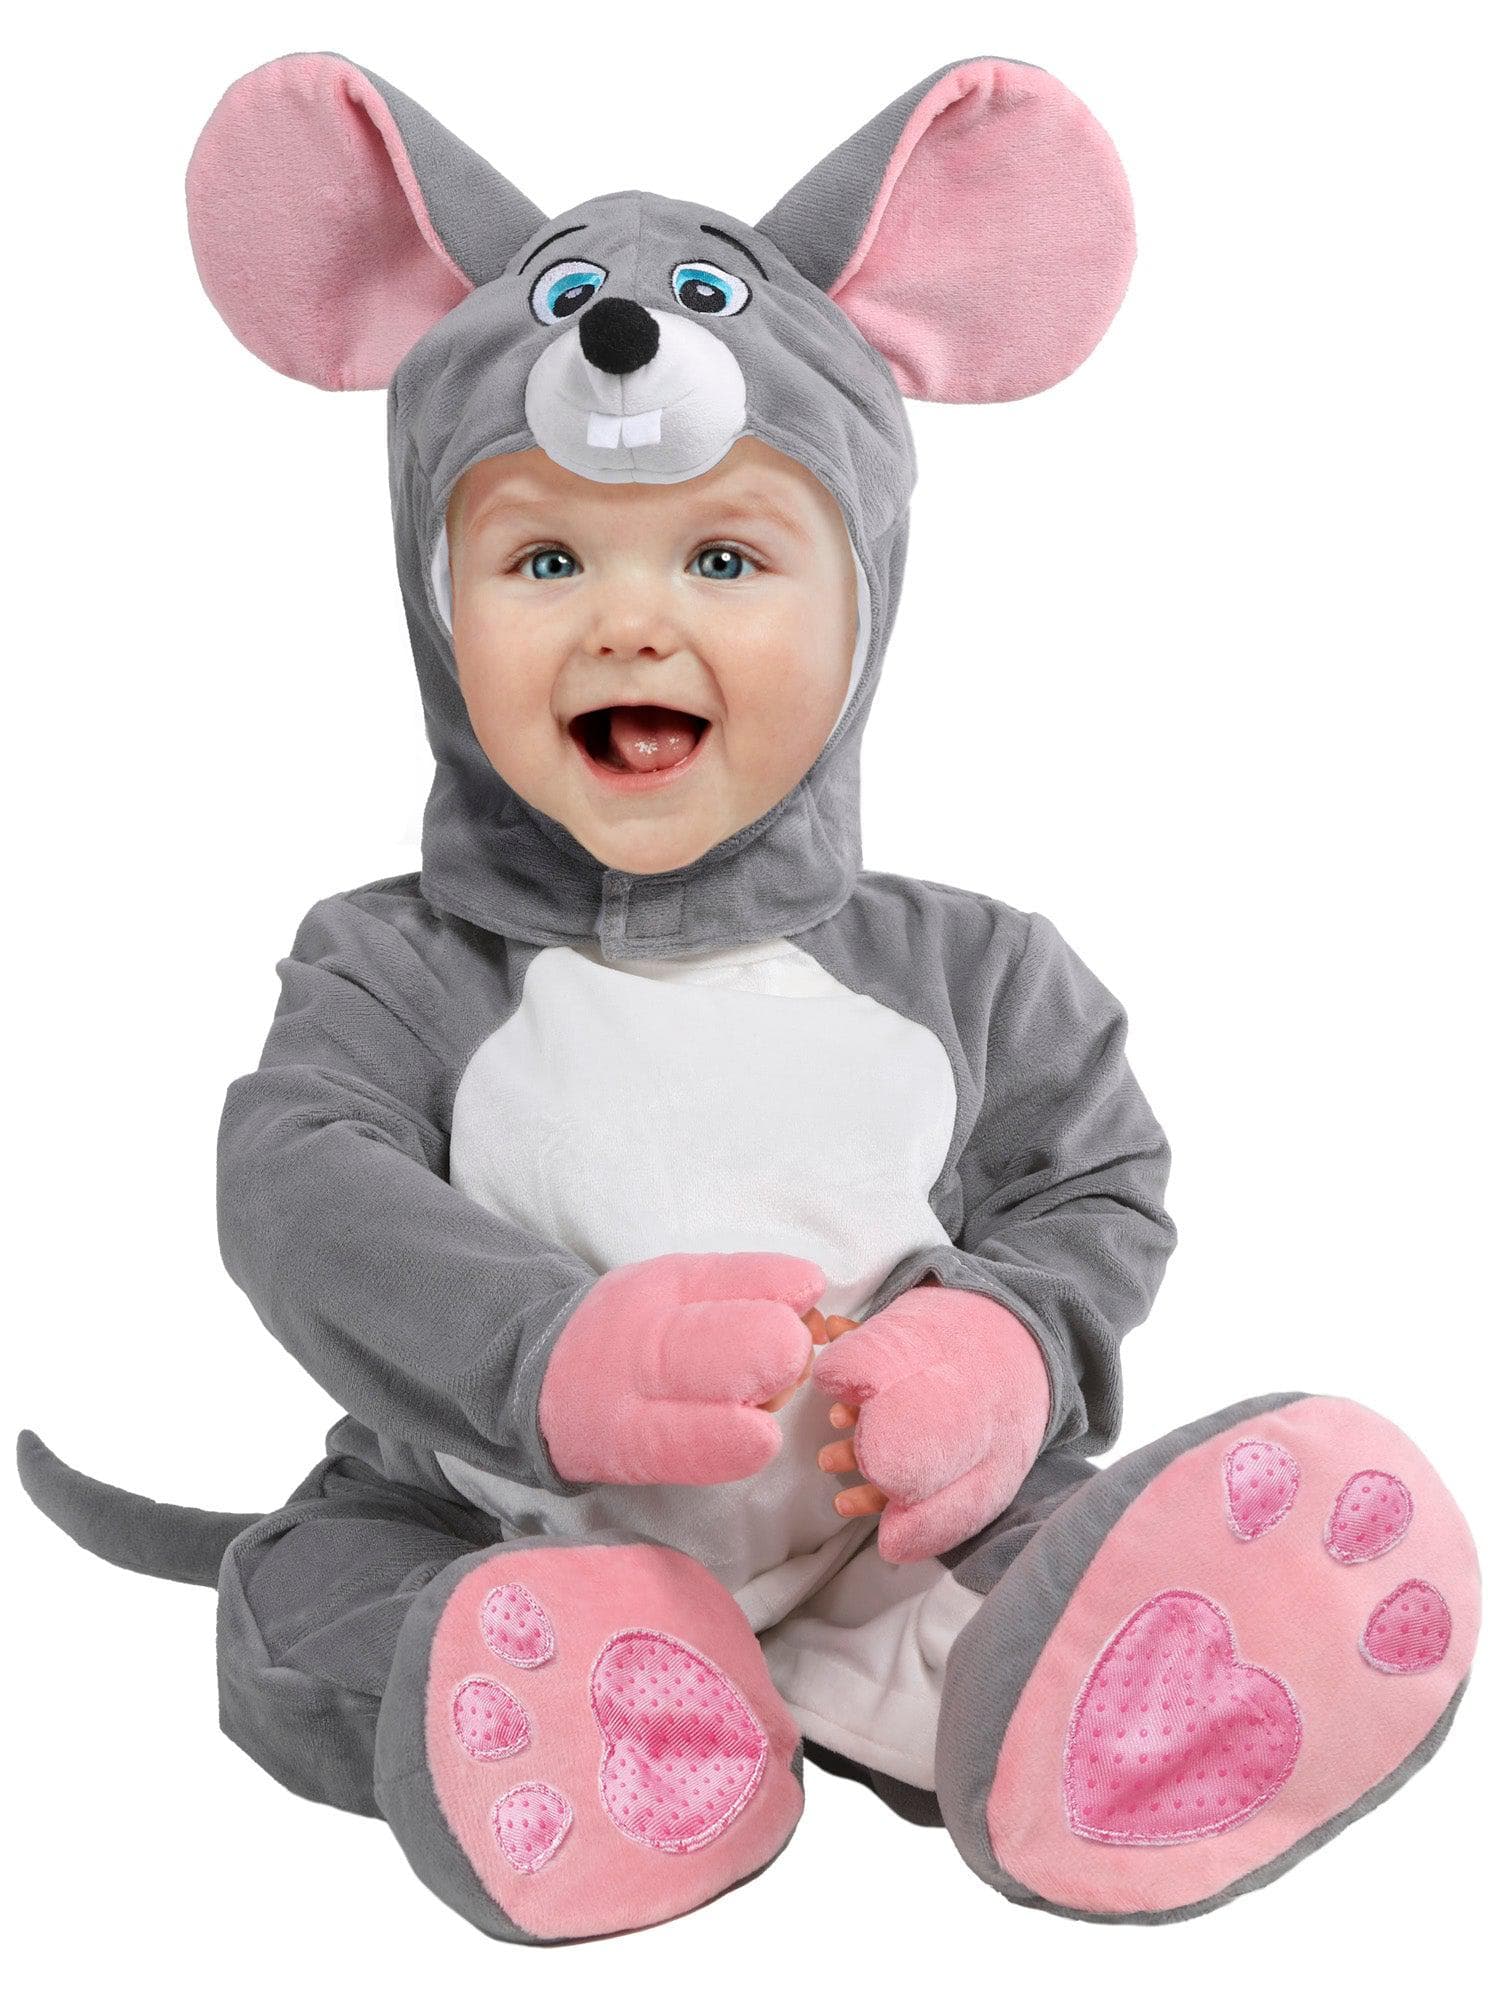 Gray Mouse Baby/Toddler Costume - costumes.com